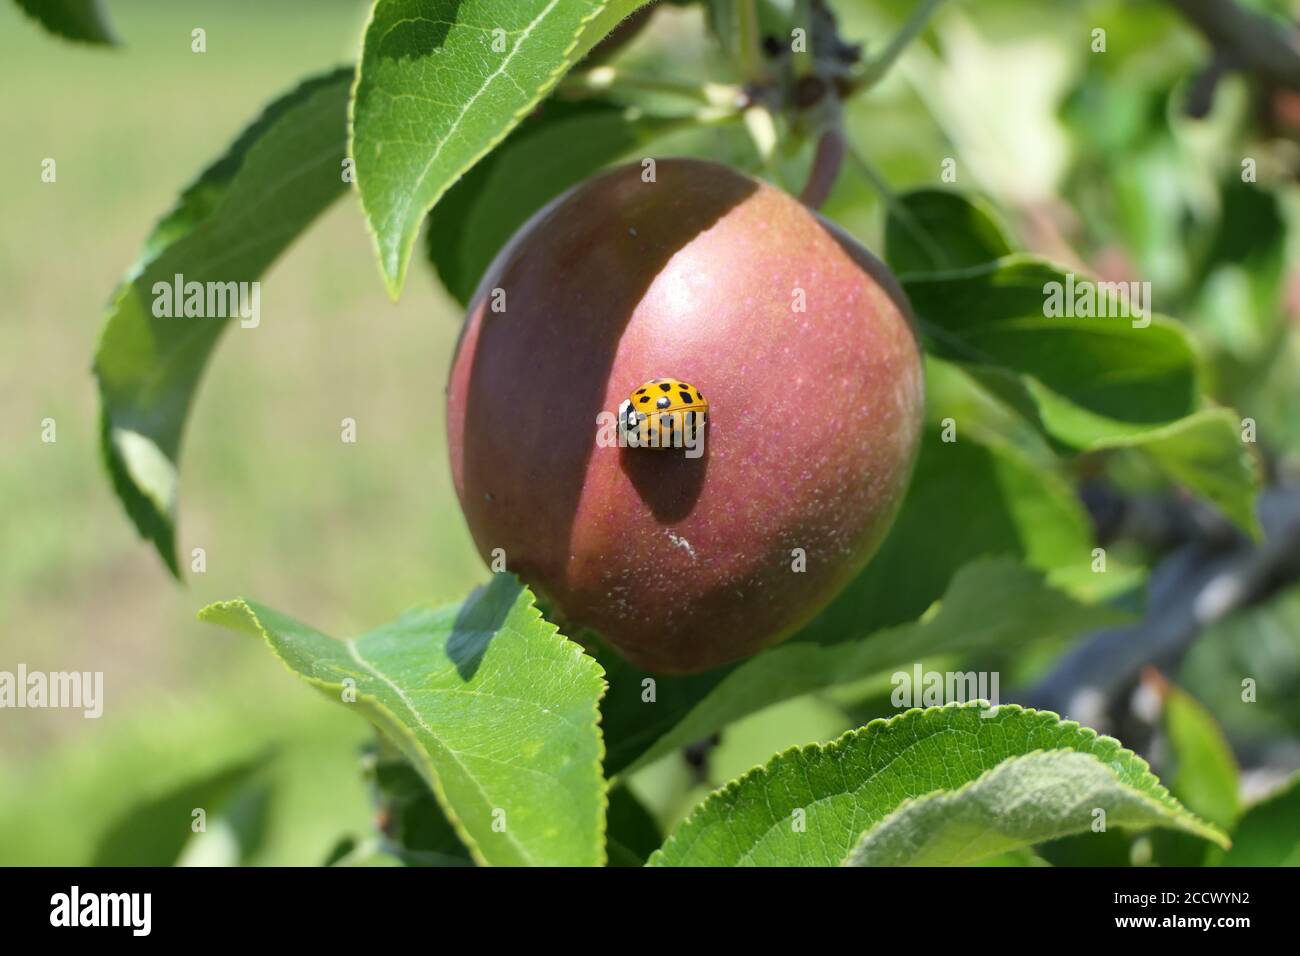 Red beetle with black dots called ladybird or ladybug sitting on a fine apple Stock Photo